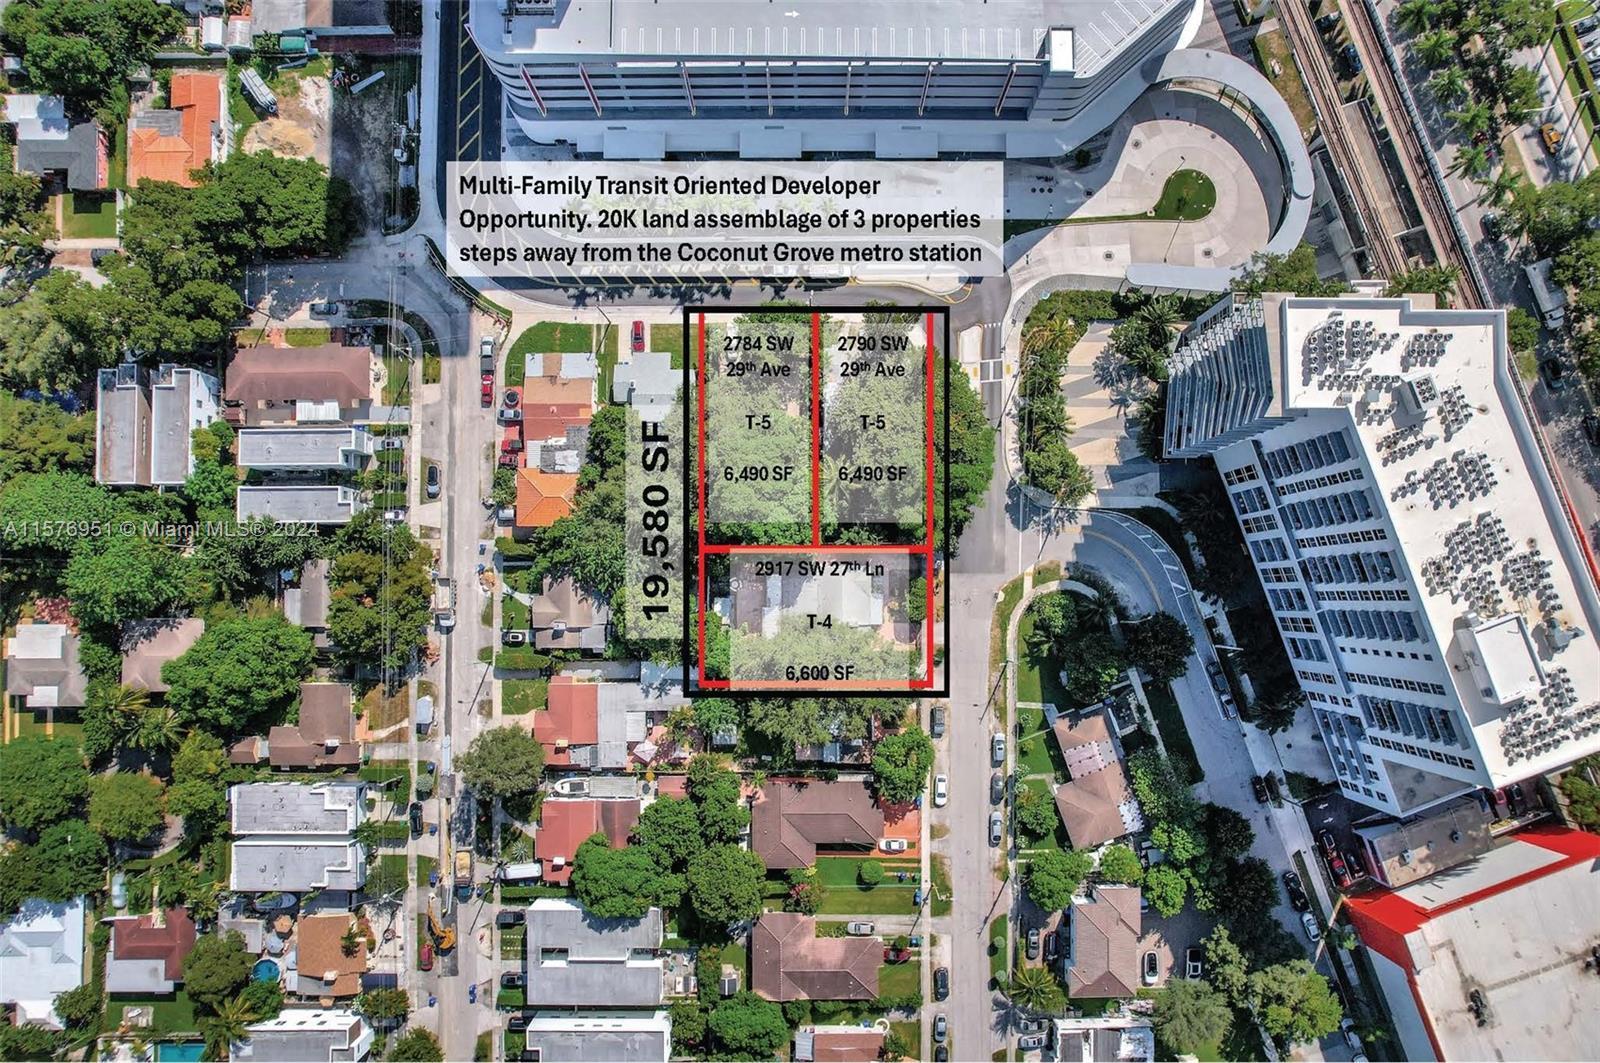 Part of a 3 property portfolio - transit oriented development opportunity. 20K SF assemblage across 